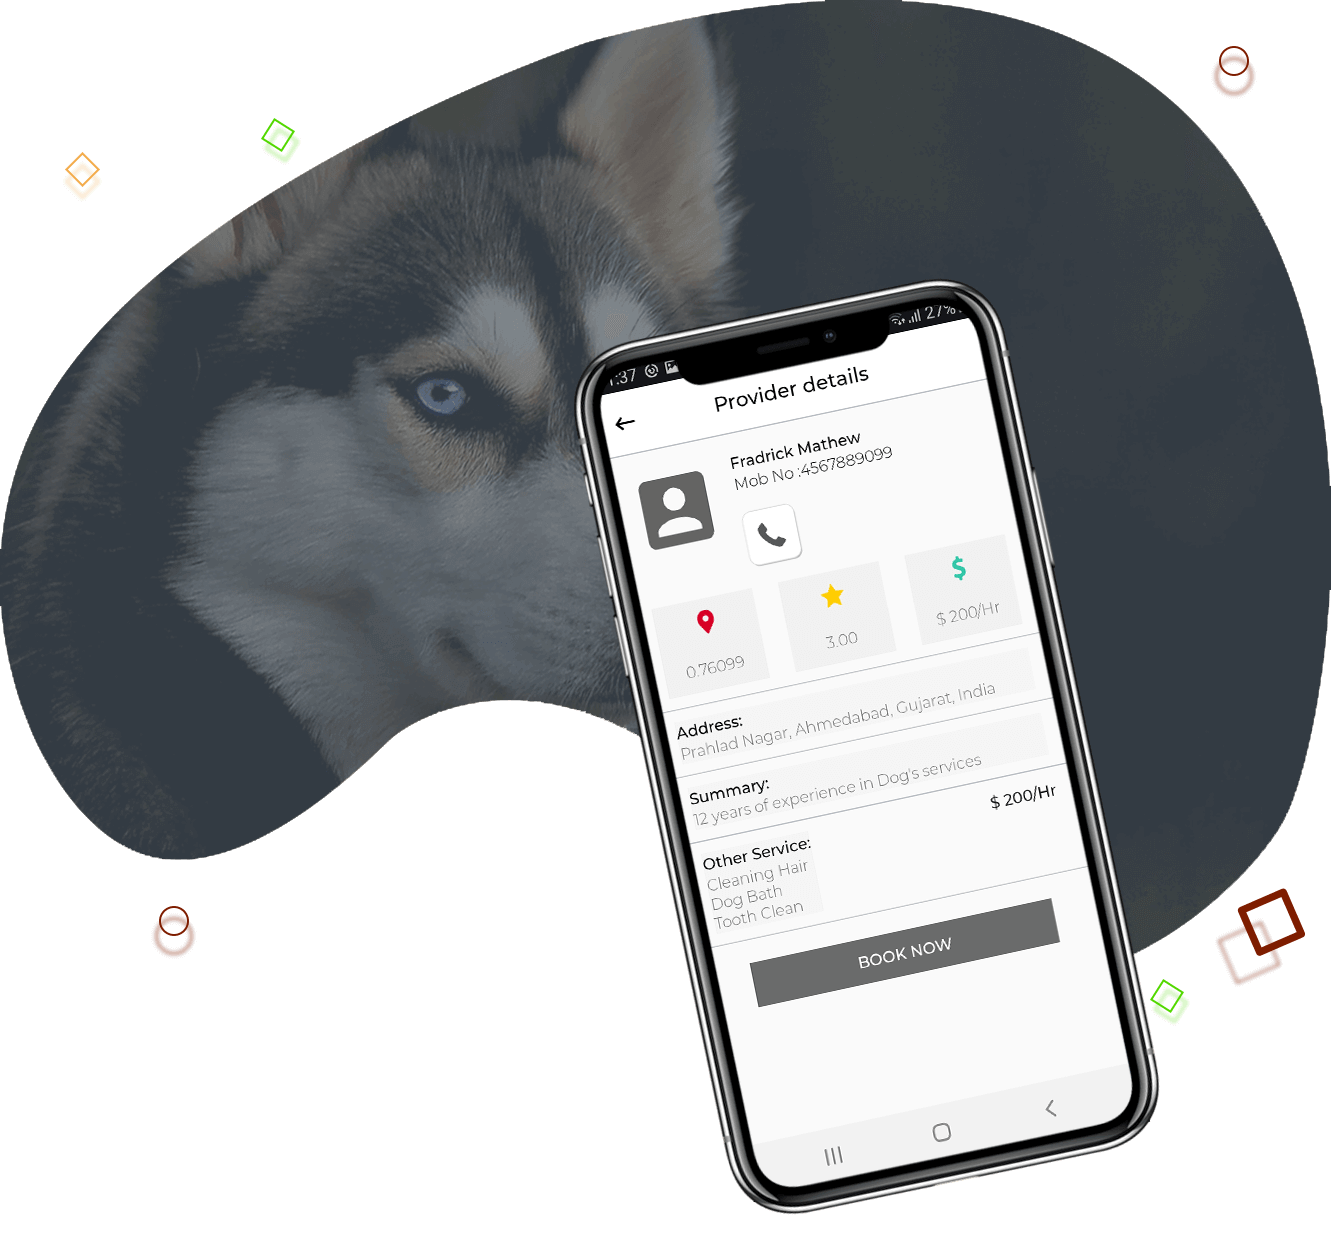 On-Demand Technologies in uber for dog walking